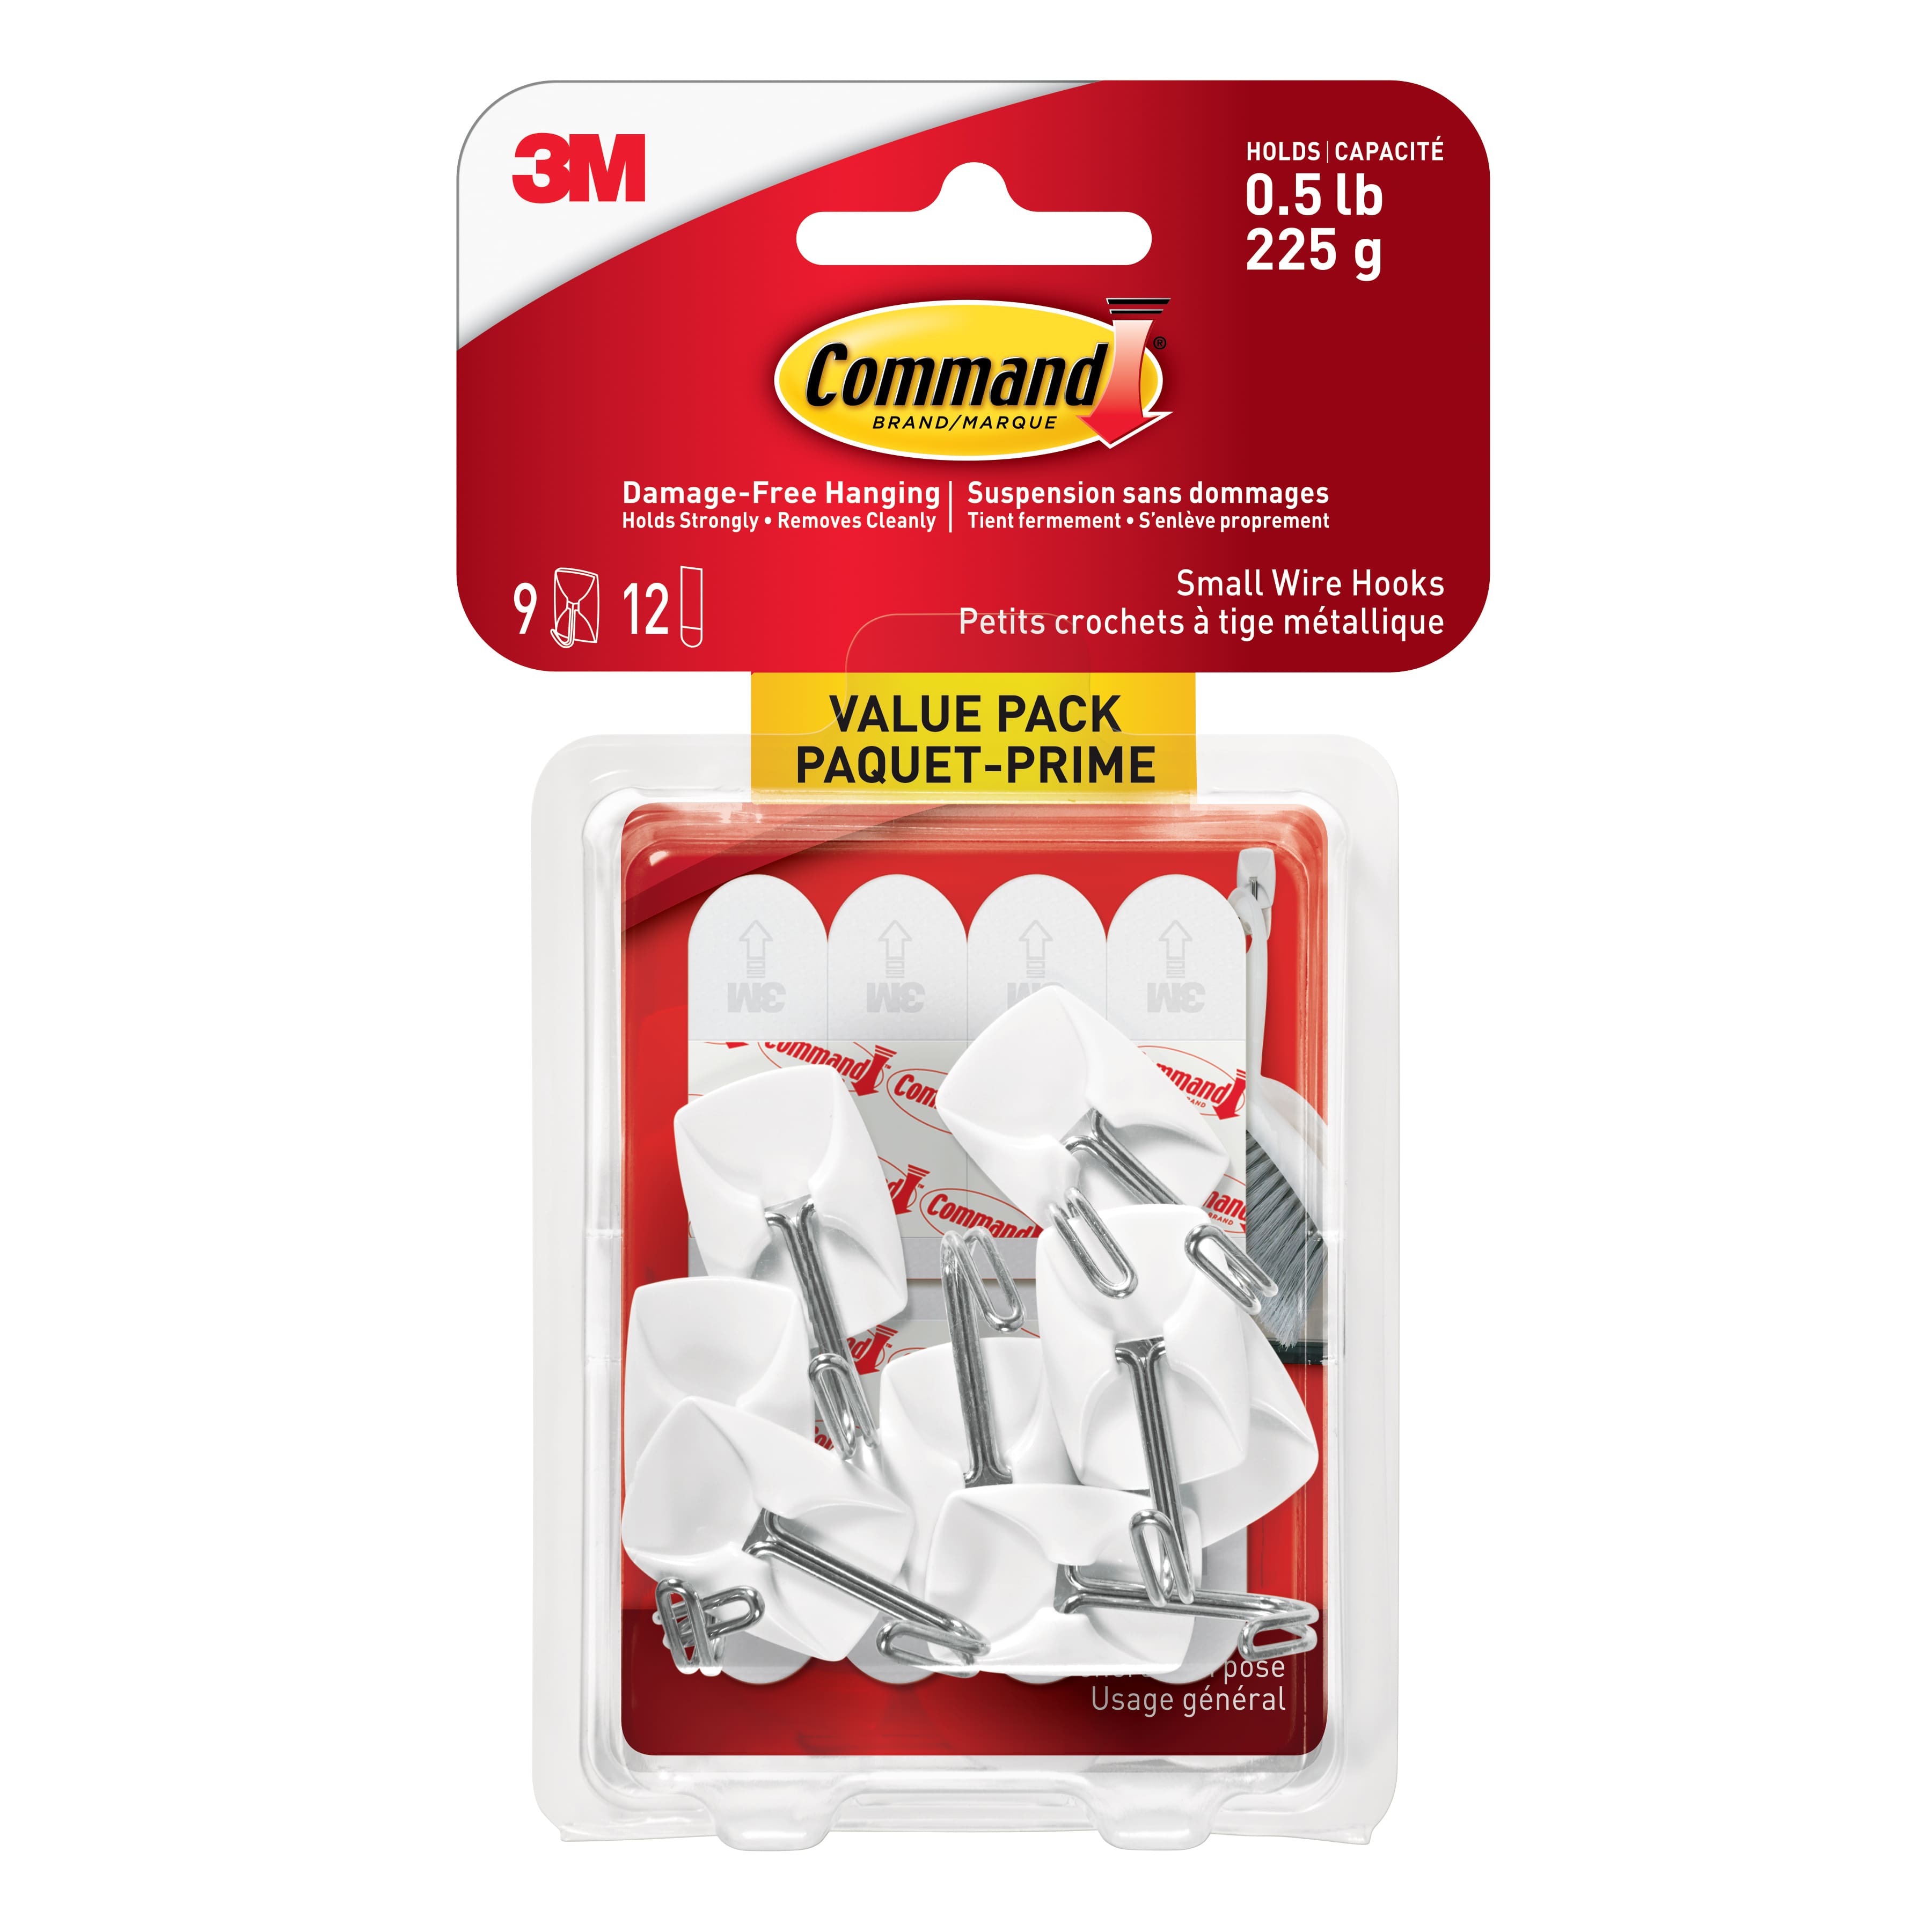 12 Packs: 9 ct. (108 total) Command™ Small Wire Hooks